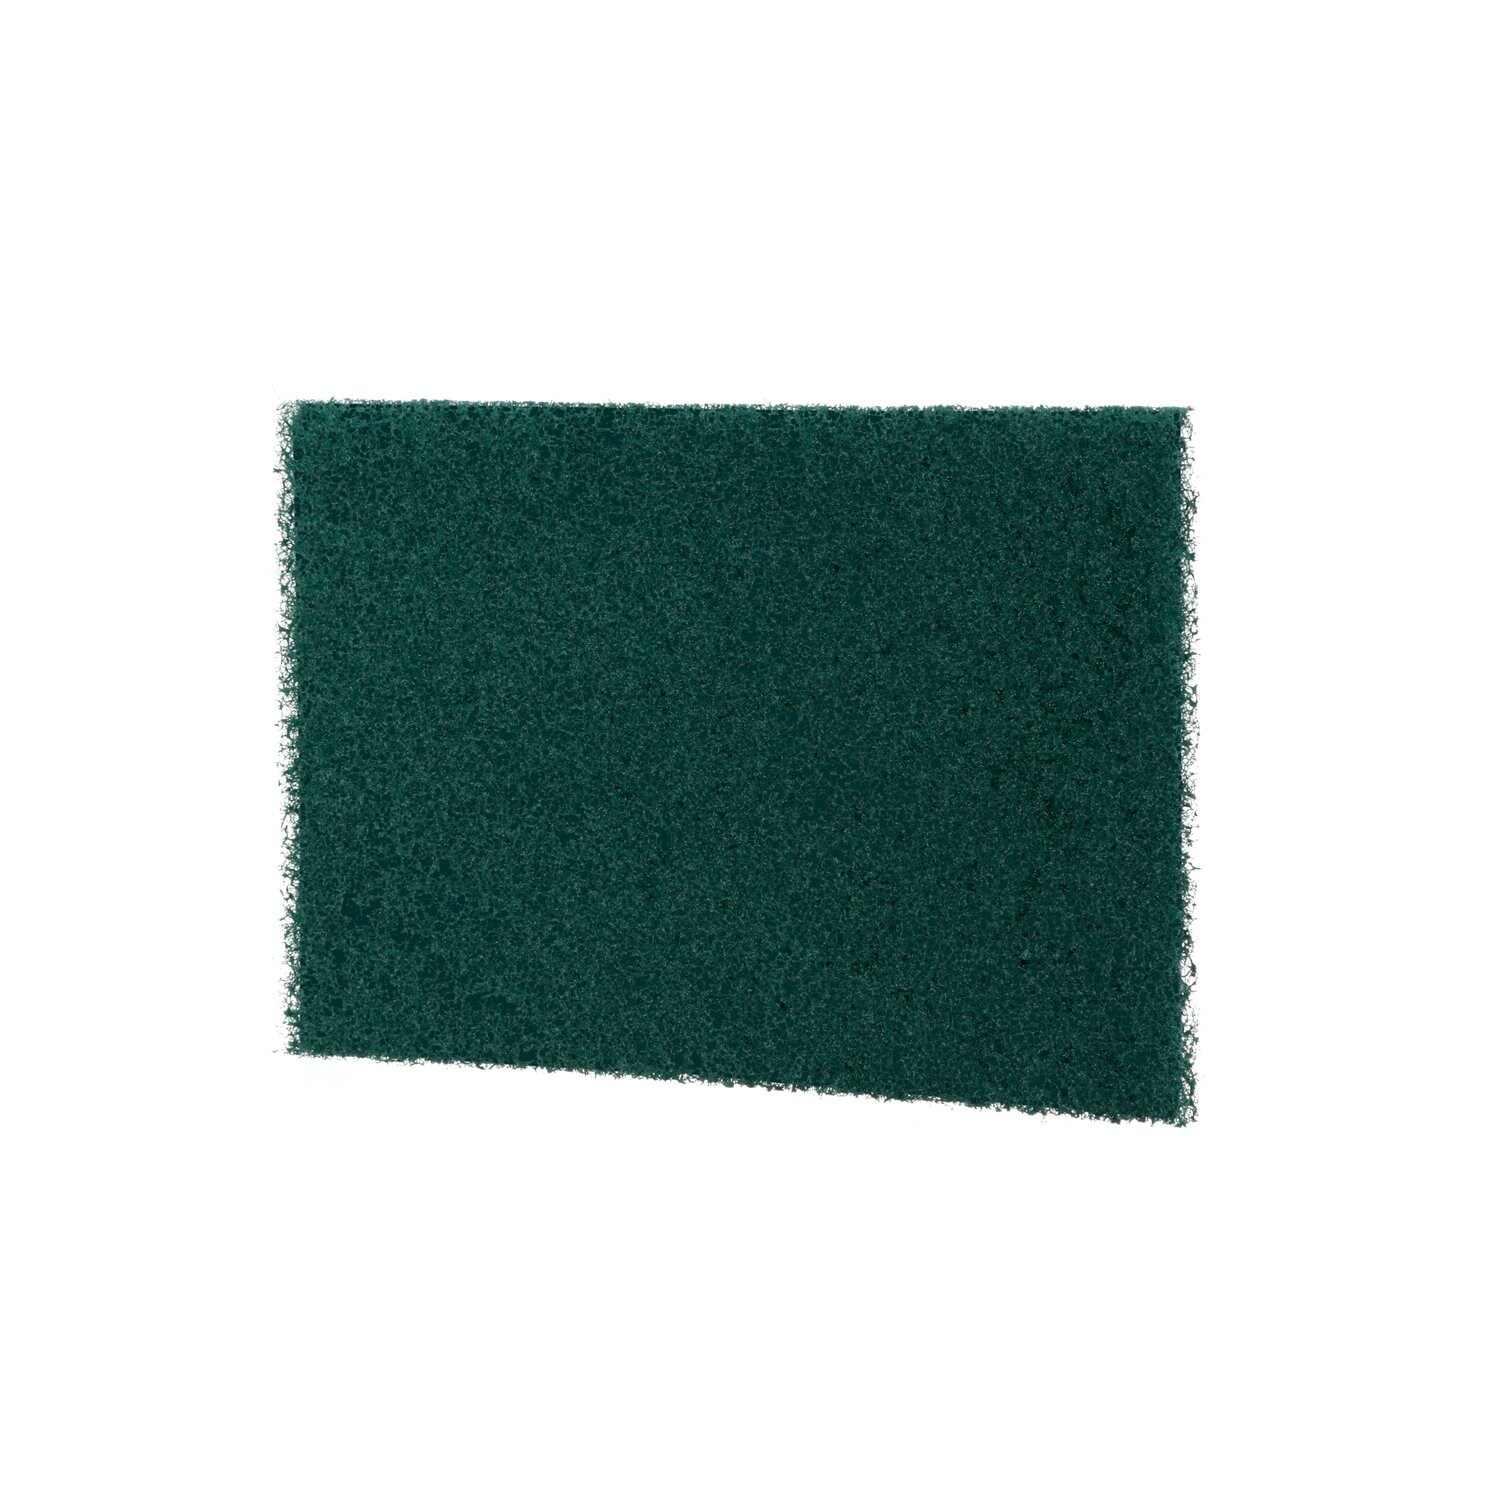 7010029049 - Niagara Heavy Duty Commercial Scouring Pad 86NCC, 10/Pack, 6 Pack/Case